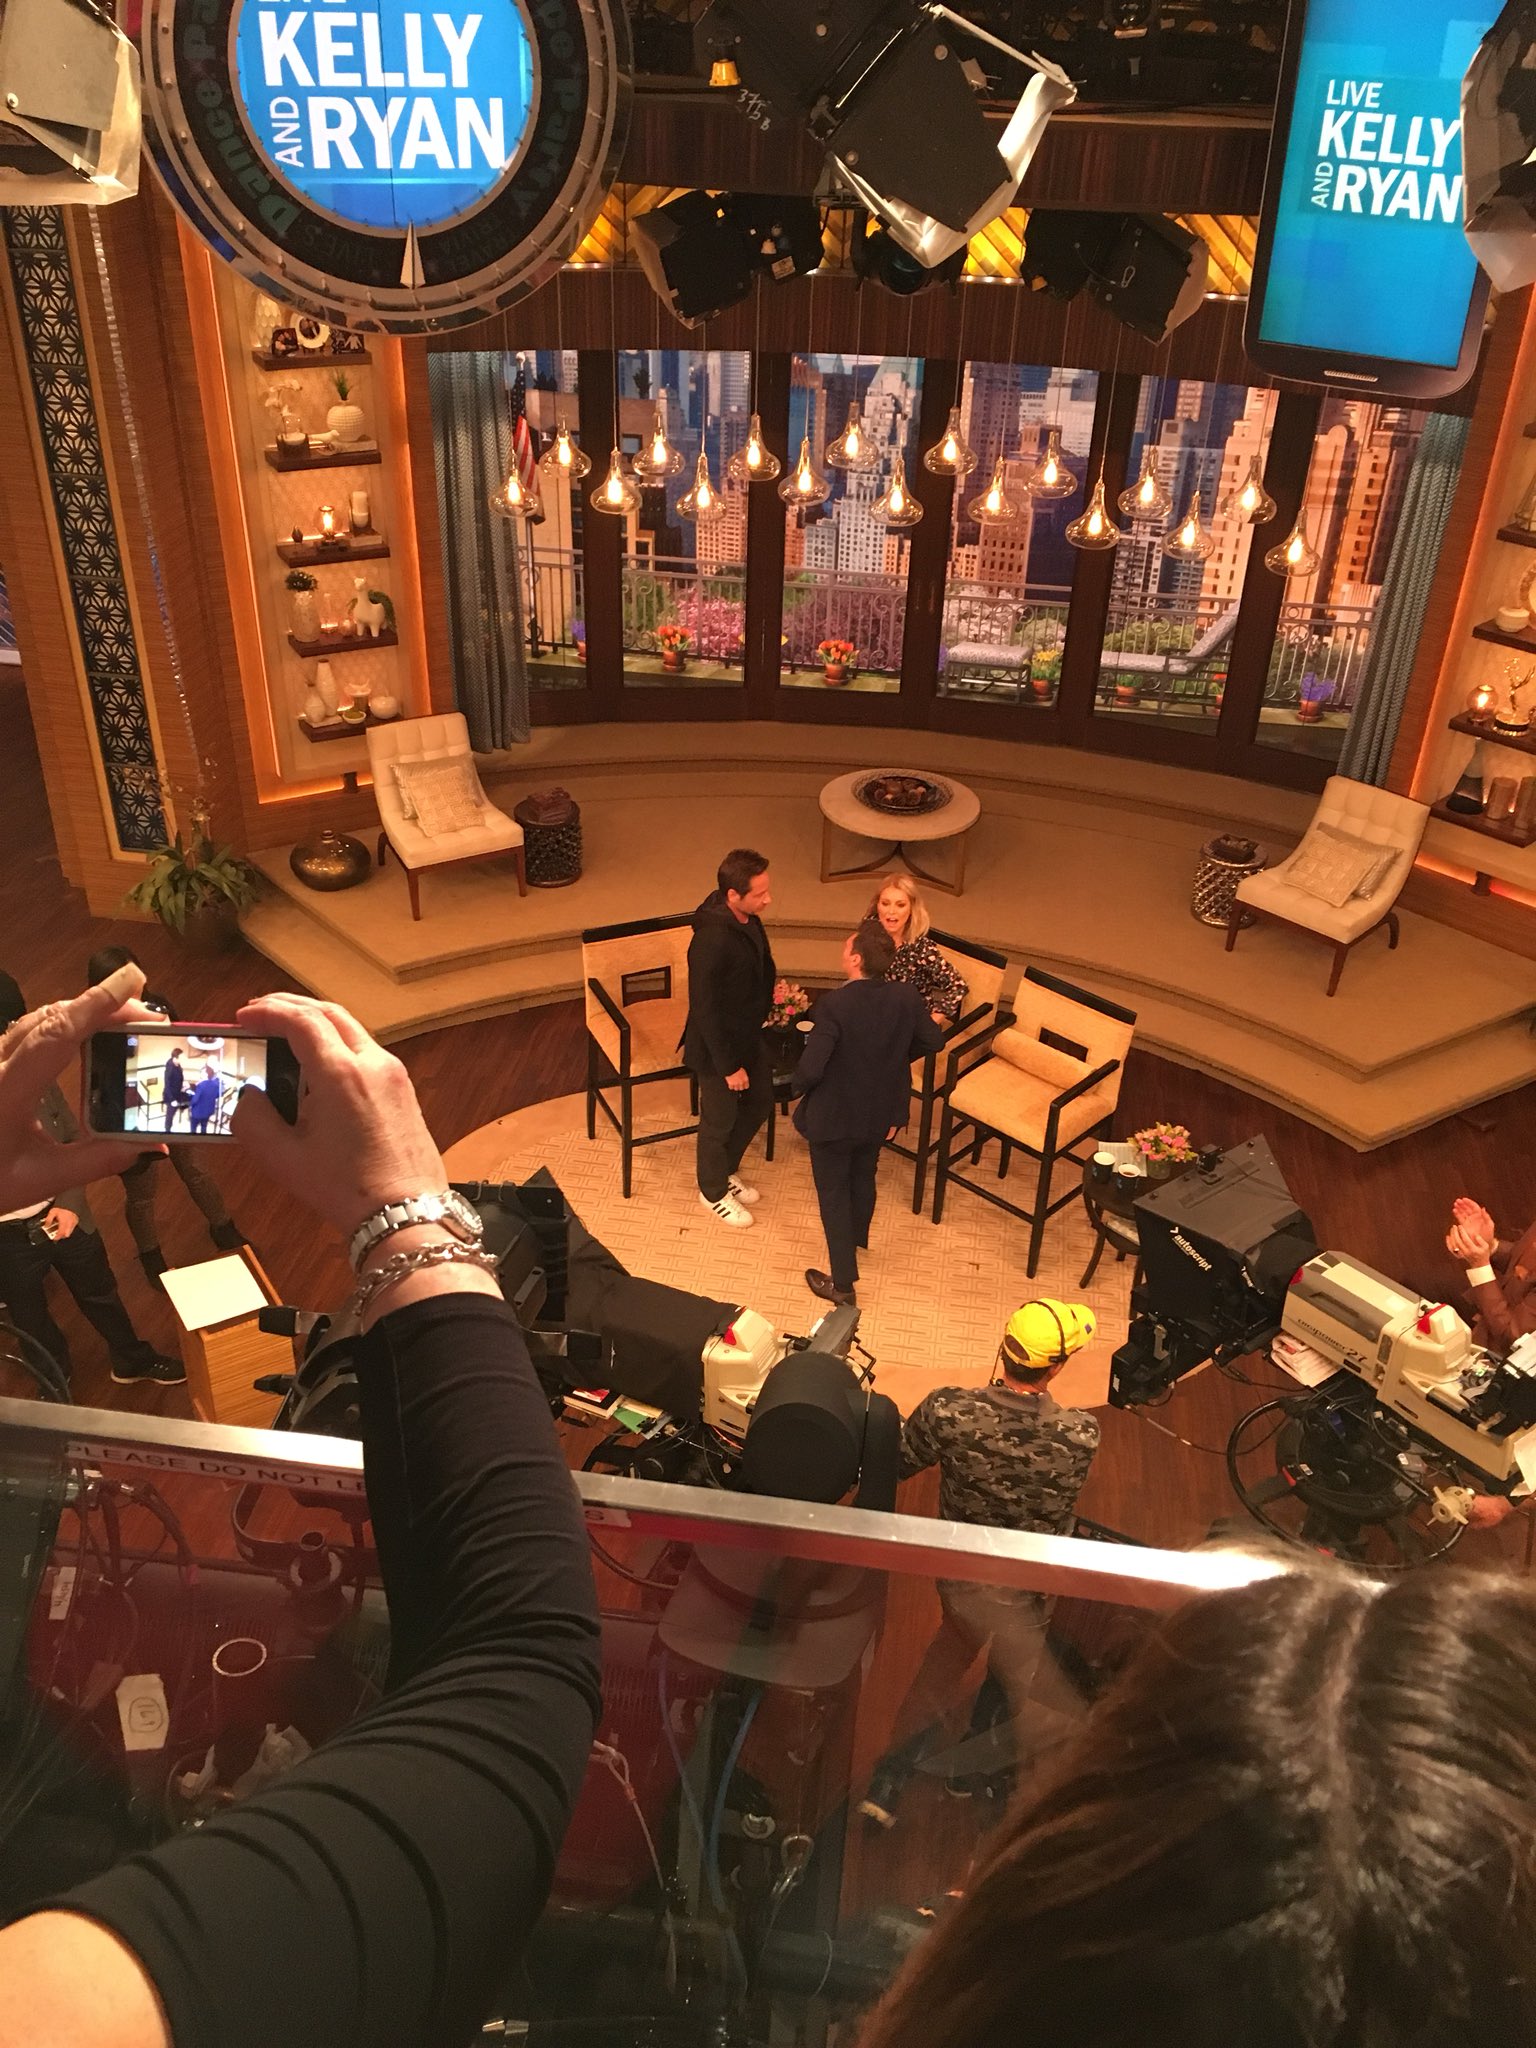 2018/04/30 - David on Live with Kelly and Ryan DcCQbgGW0AAoRlm